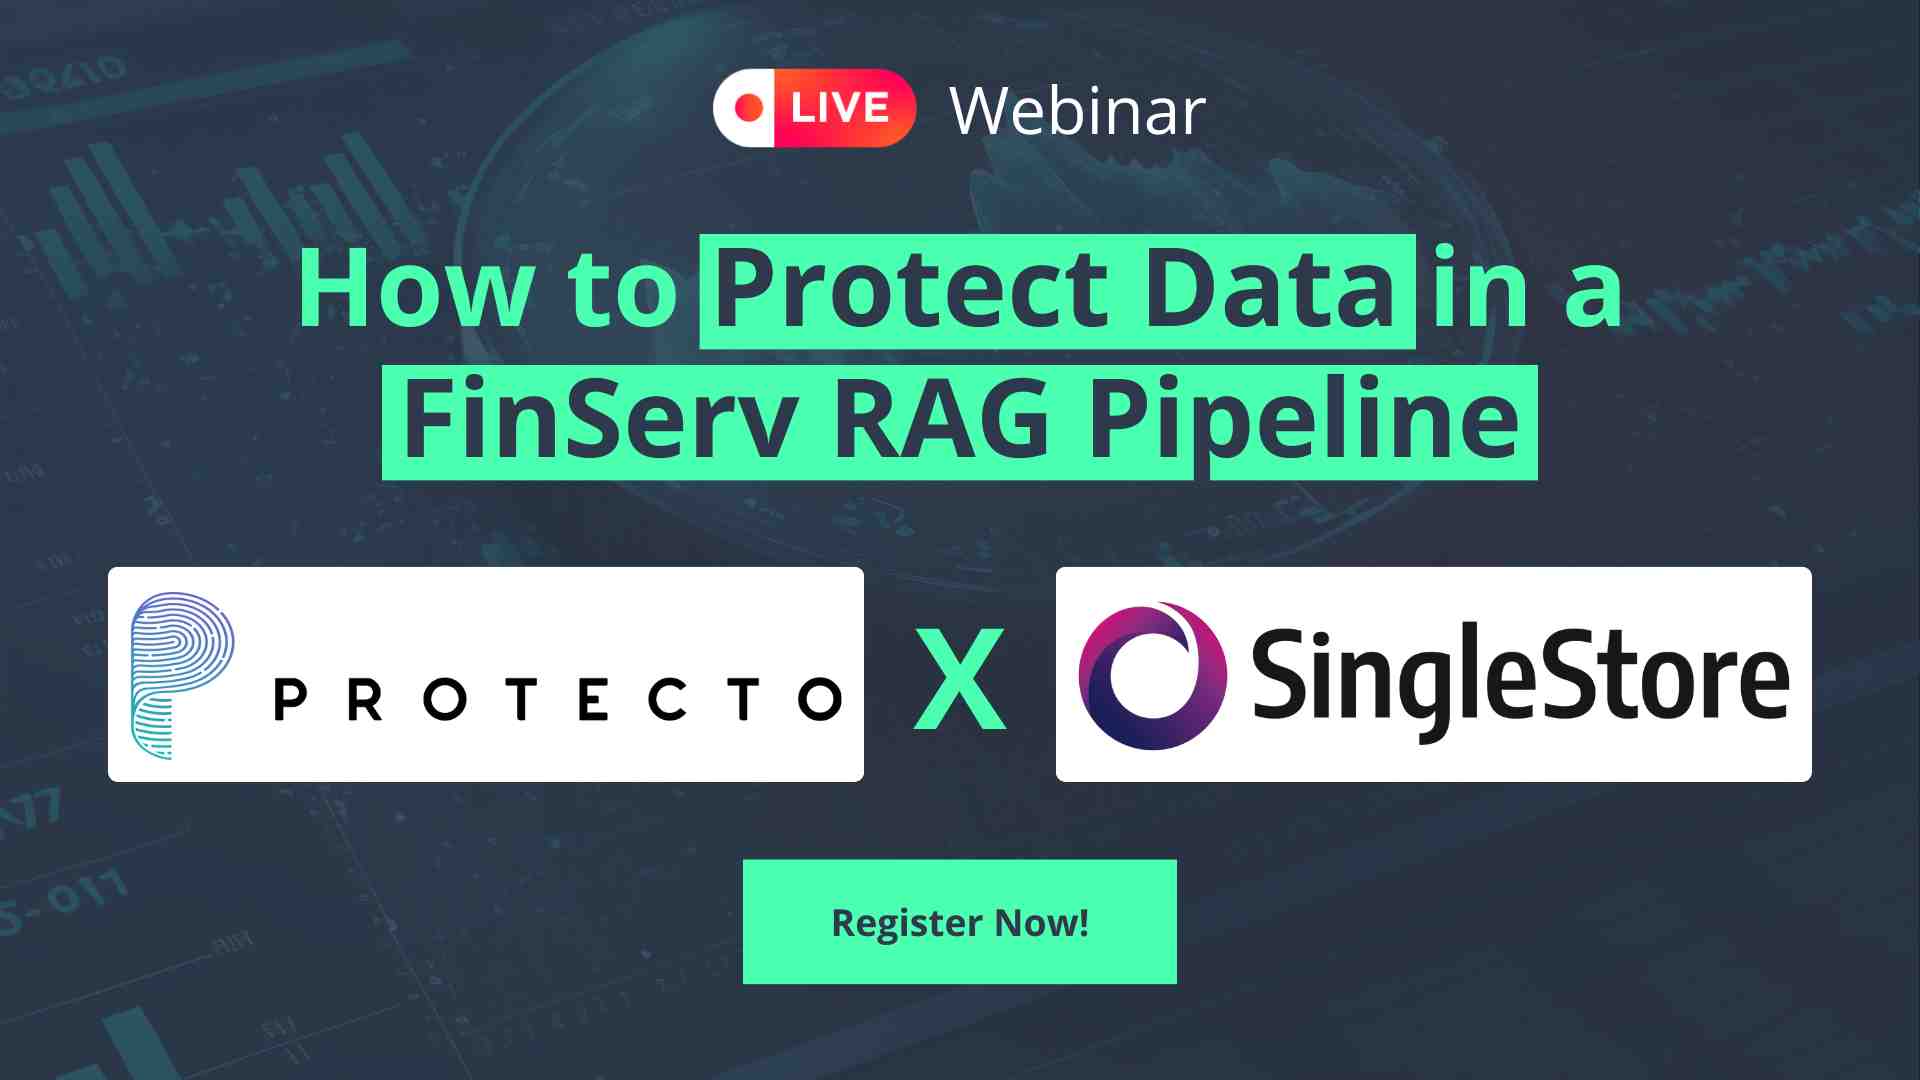 How to Protect Data in a FinServ RAG Pipeline